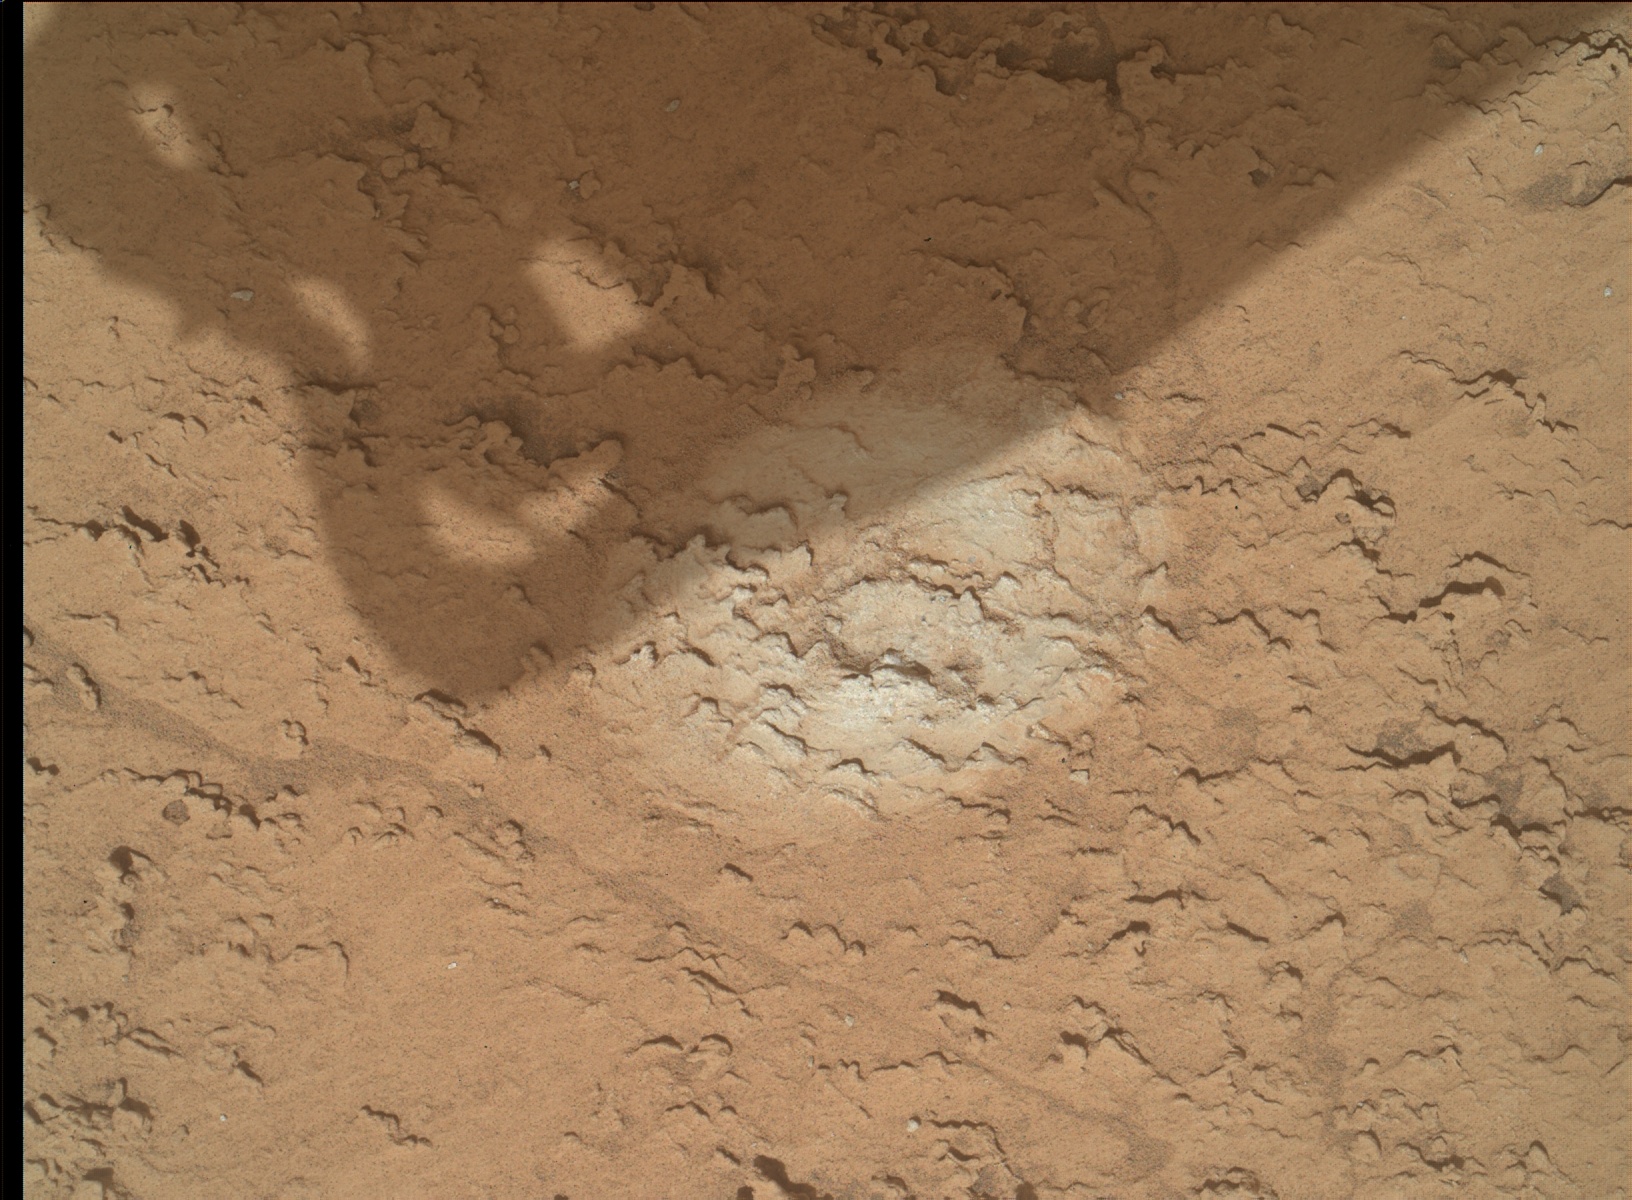 Nasa's Mars rover Curiosity acquired this image using its Mars Hand Lens Imager (MAHLI) on Sol 3667